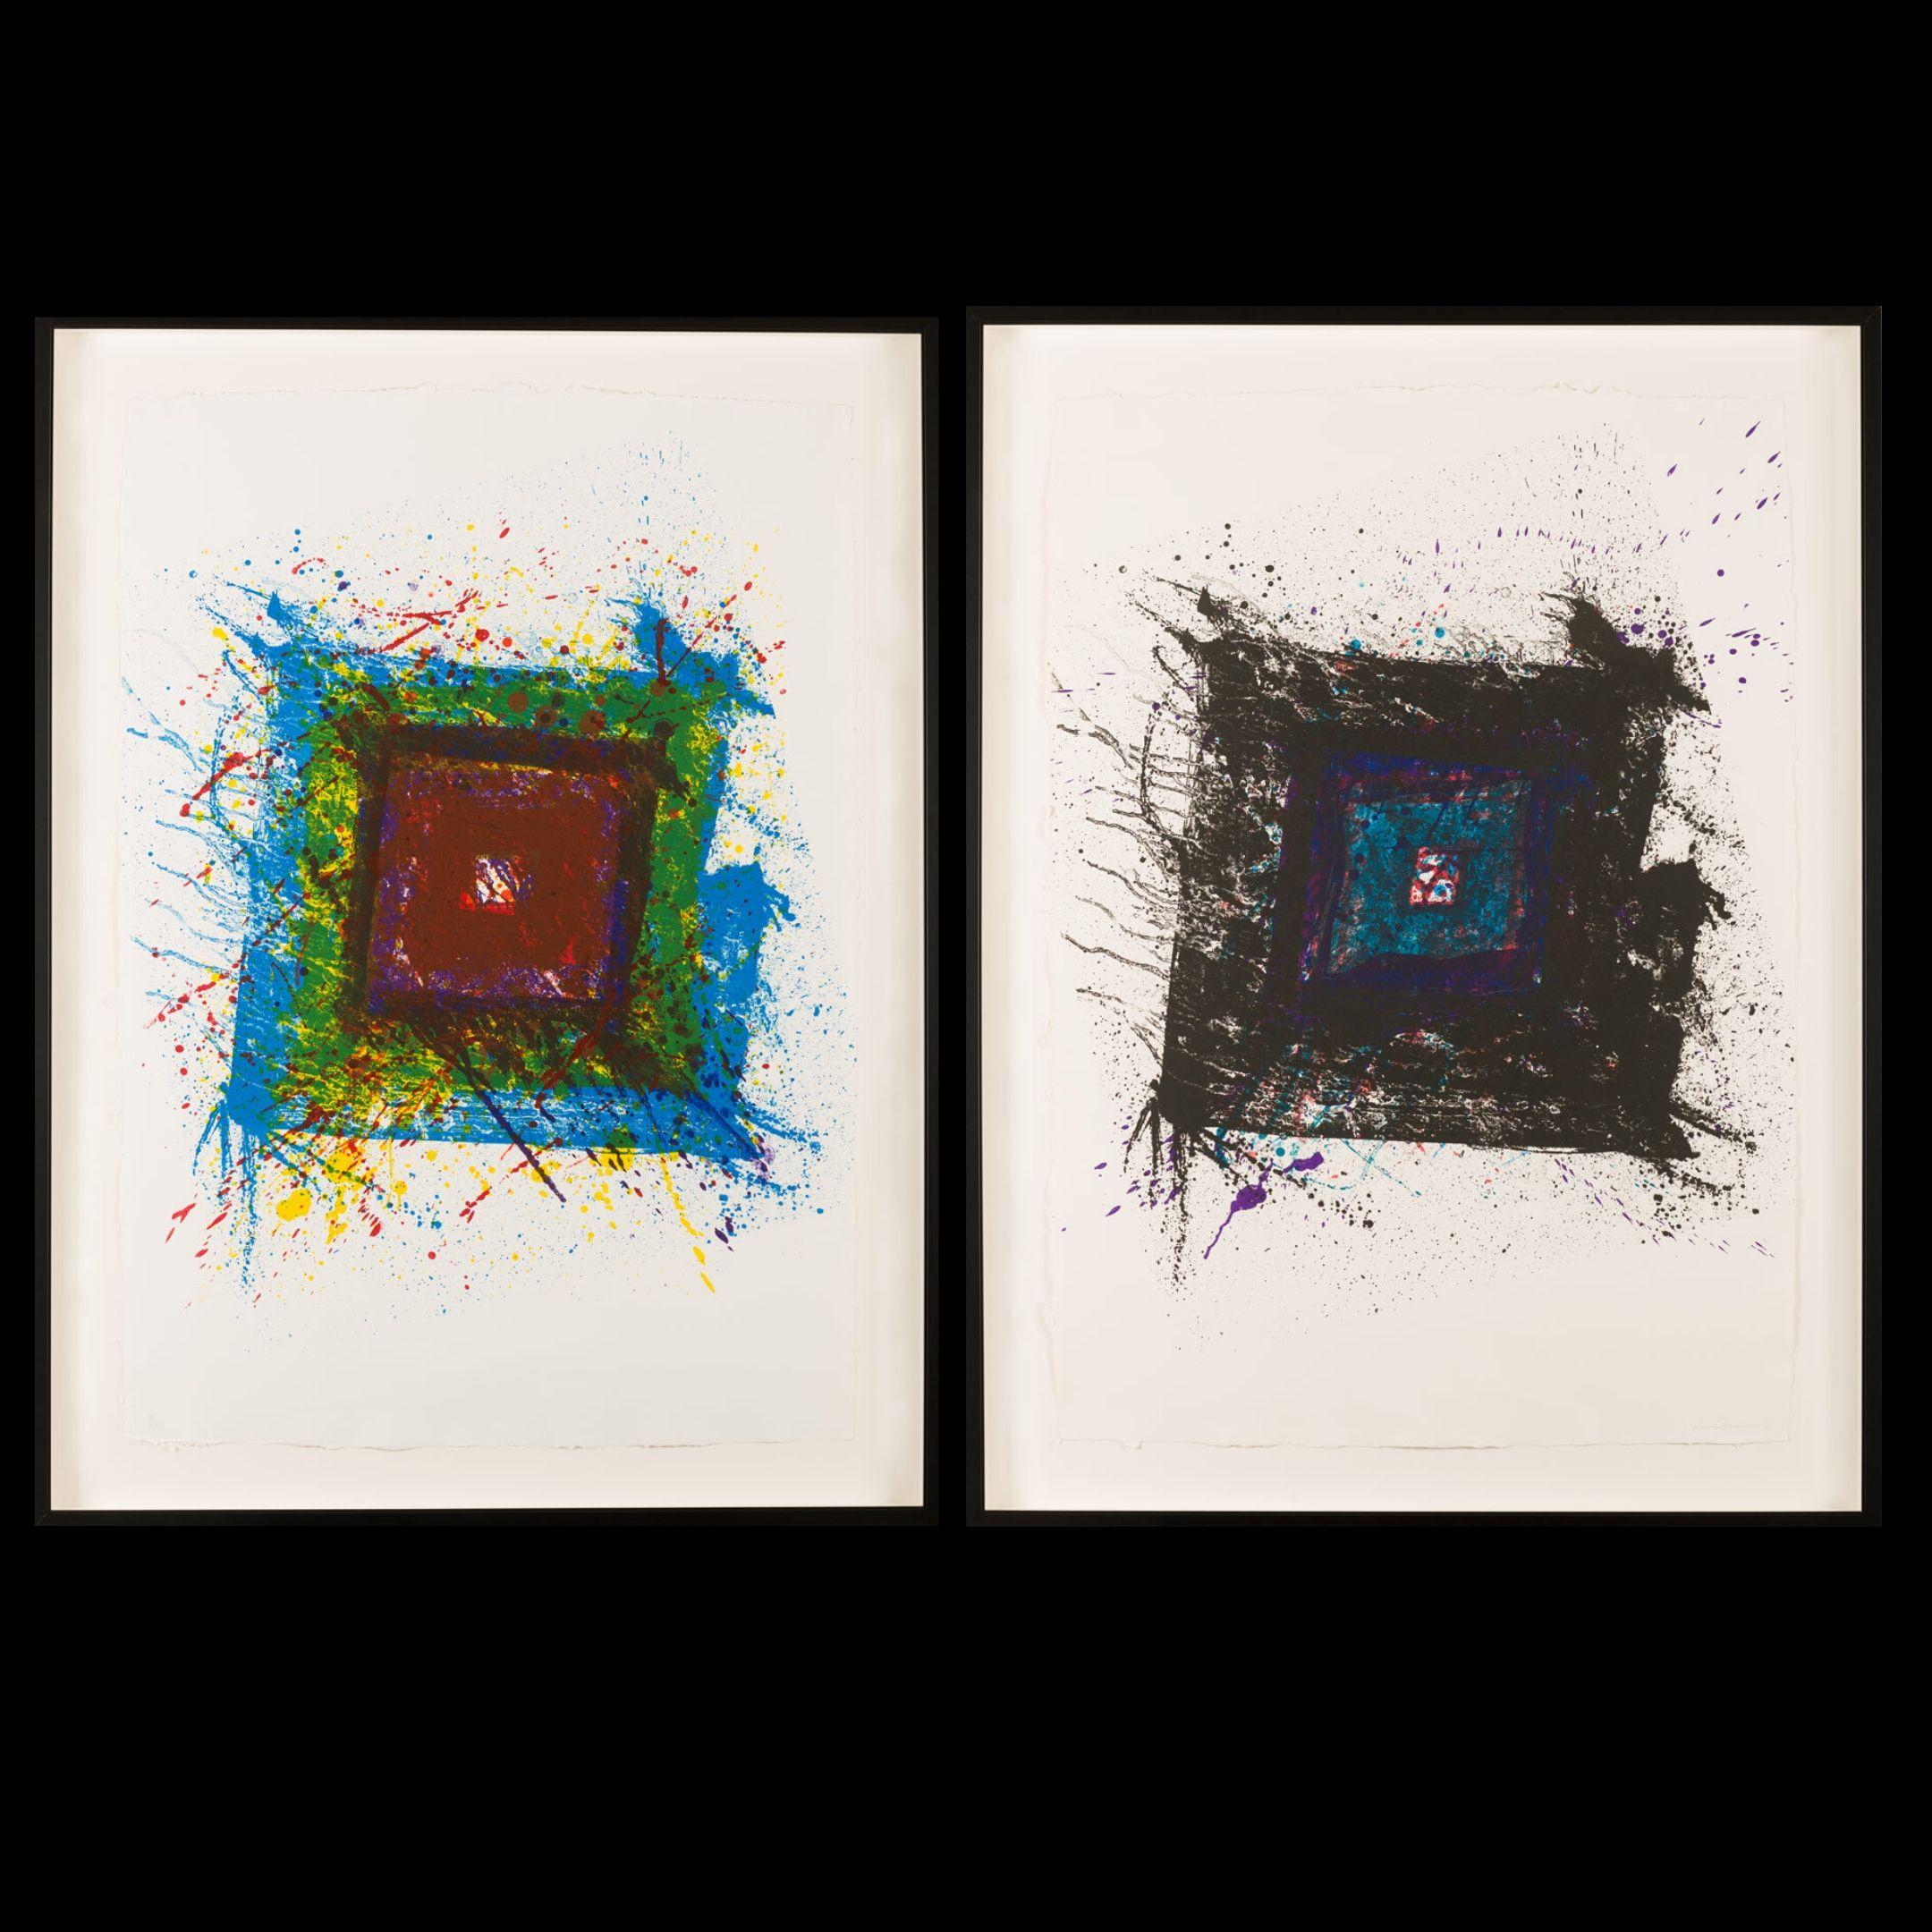  Francis, Sam                  
(1923 – 1994)

"Paradise of Ash". ( Suite of 1 - Diptych)

Lithograph in color on HMP Koller paper, in two sheets
Signed in pencil on lower right and numbered in pencil on lower left
Blindstamp of the